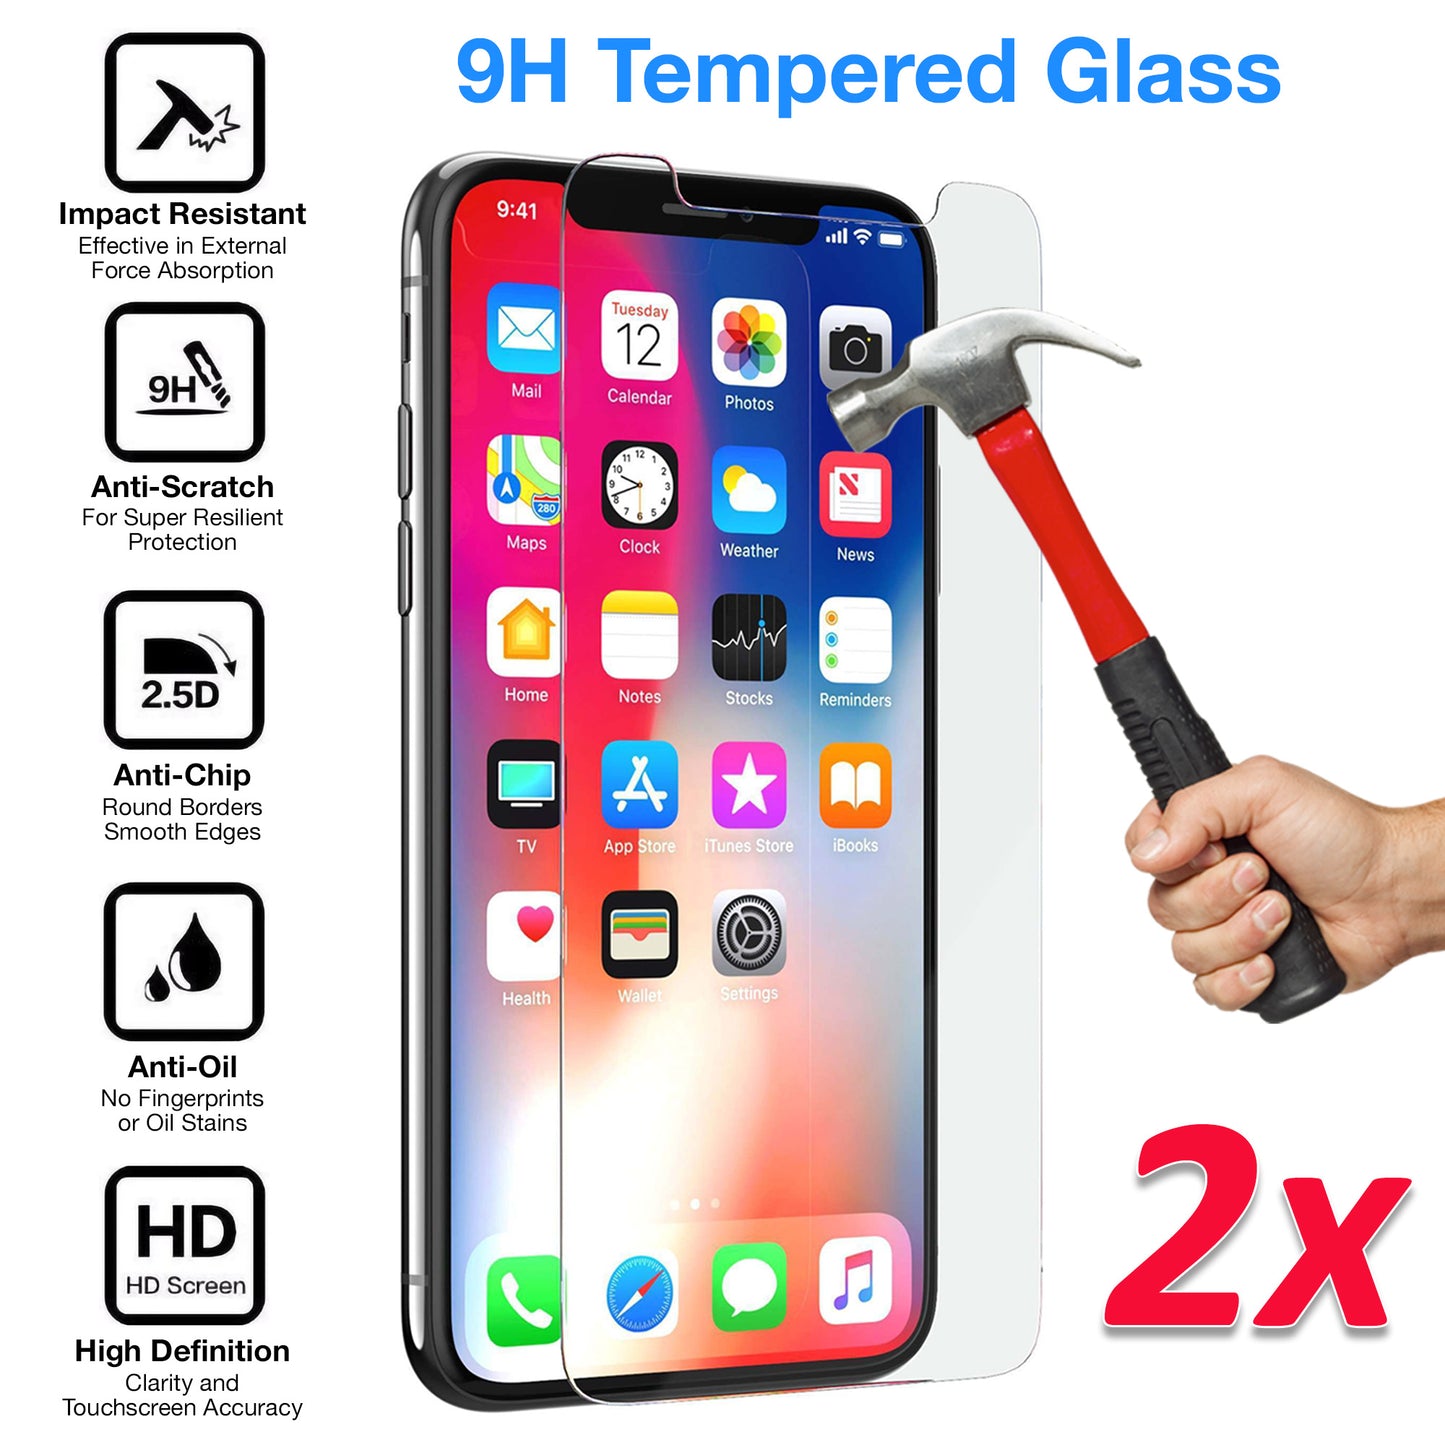 [2 Pack] MEZON Apple iPhone XS Max (6.5") Tempered Glass Crystal Clear Premium 9H HD Case Friendly Screen Protector